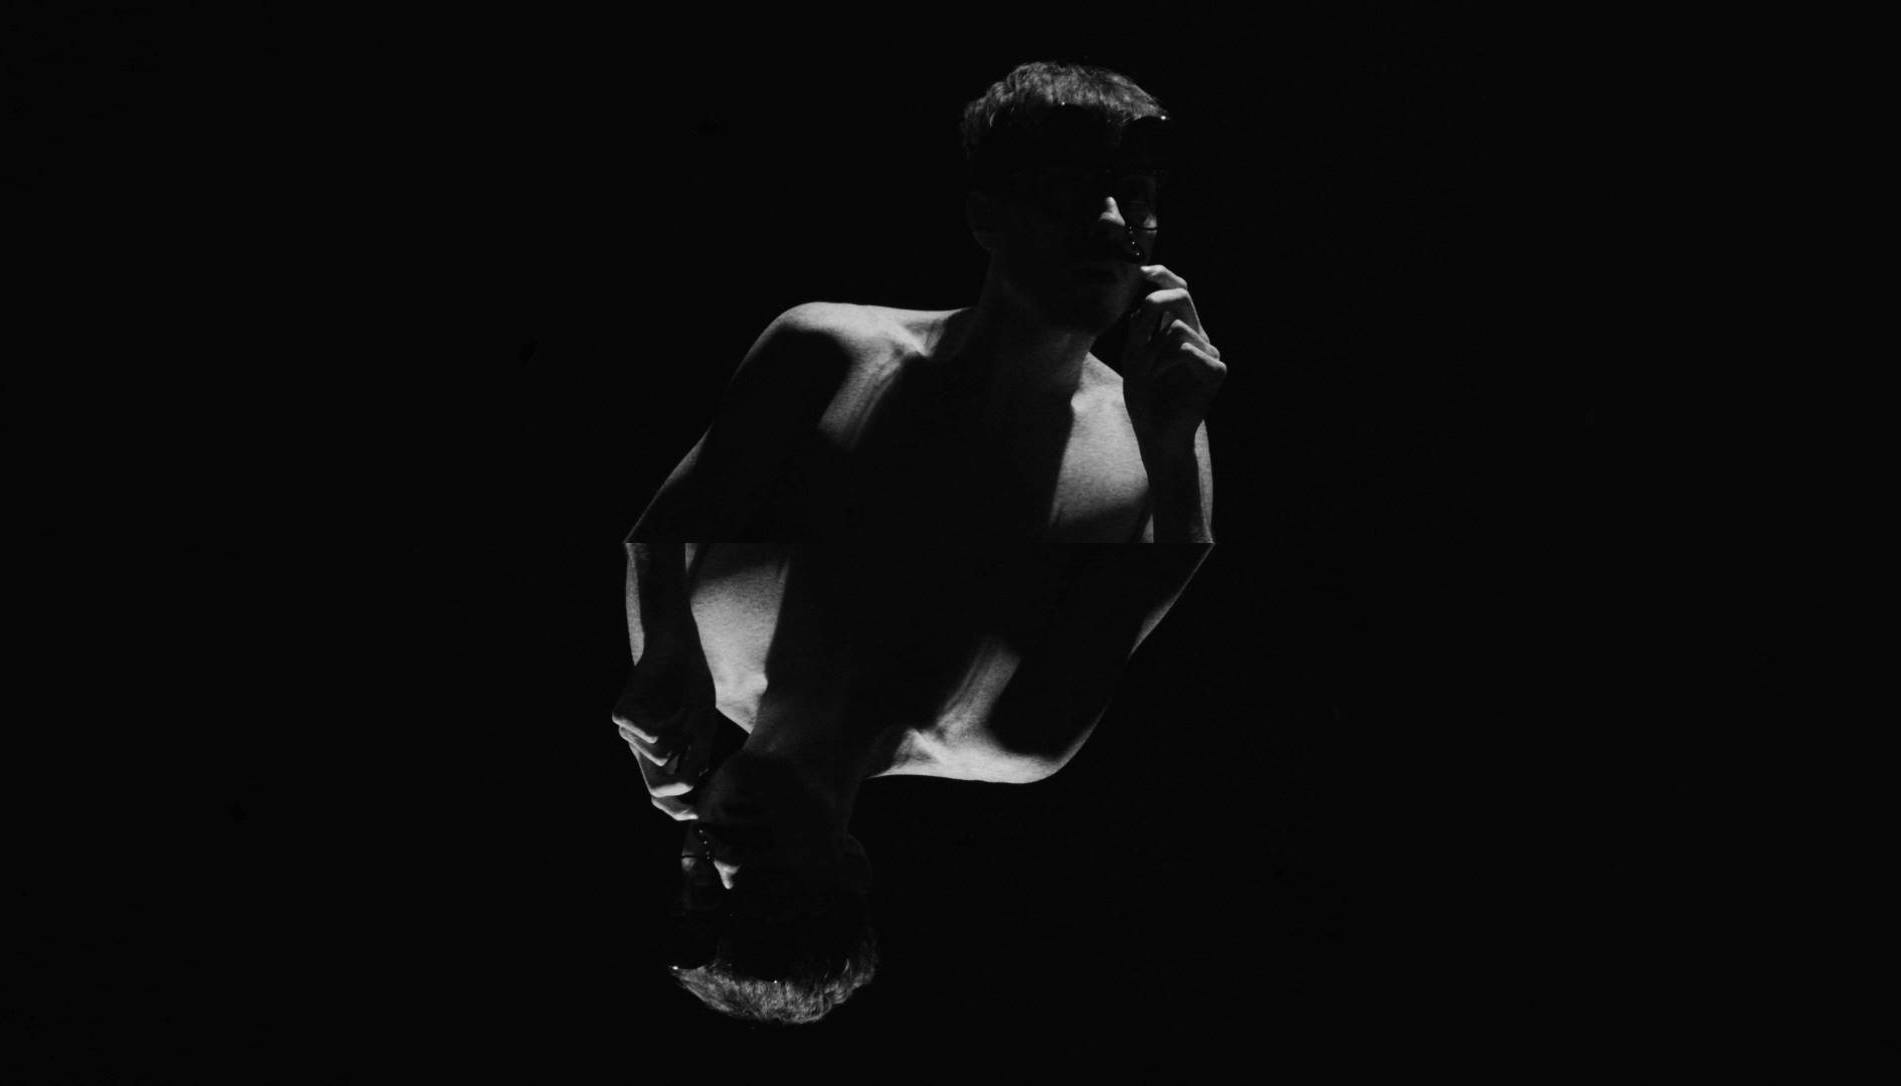 A male figure emerges frontally from the shadows. The photo is in black and white.